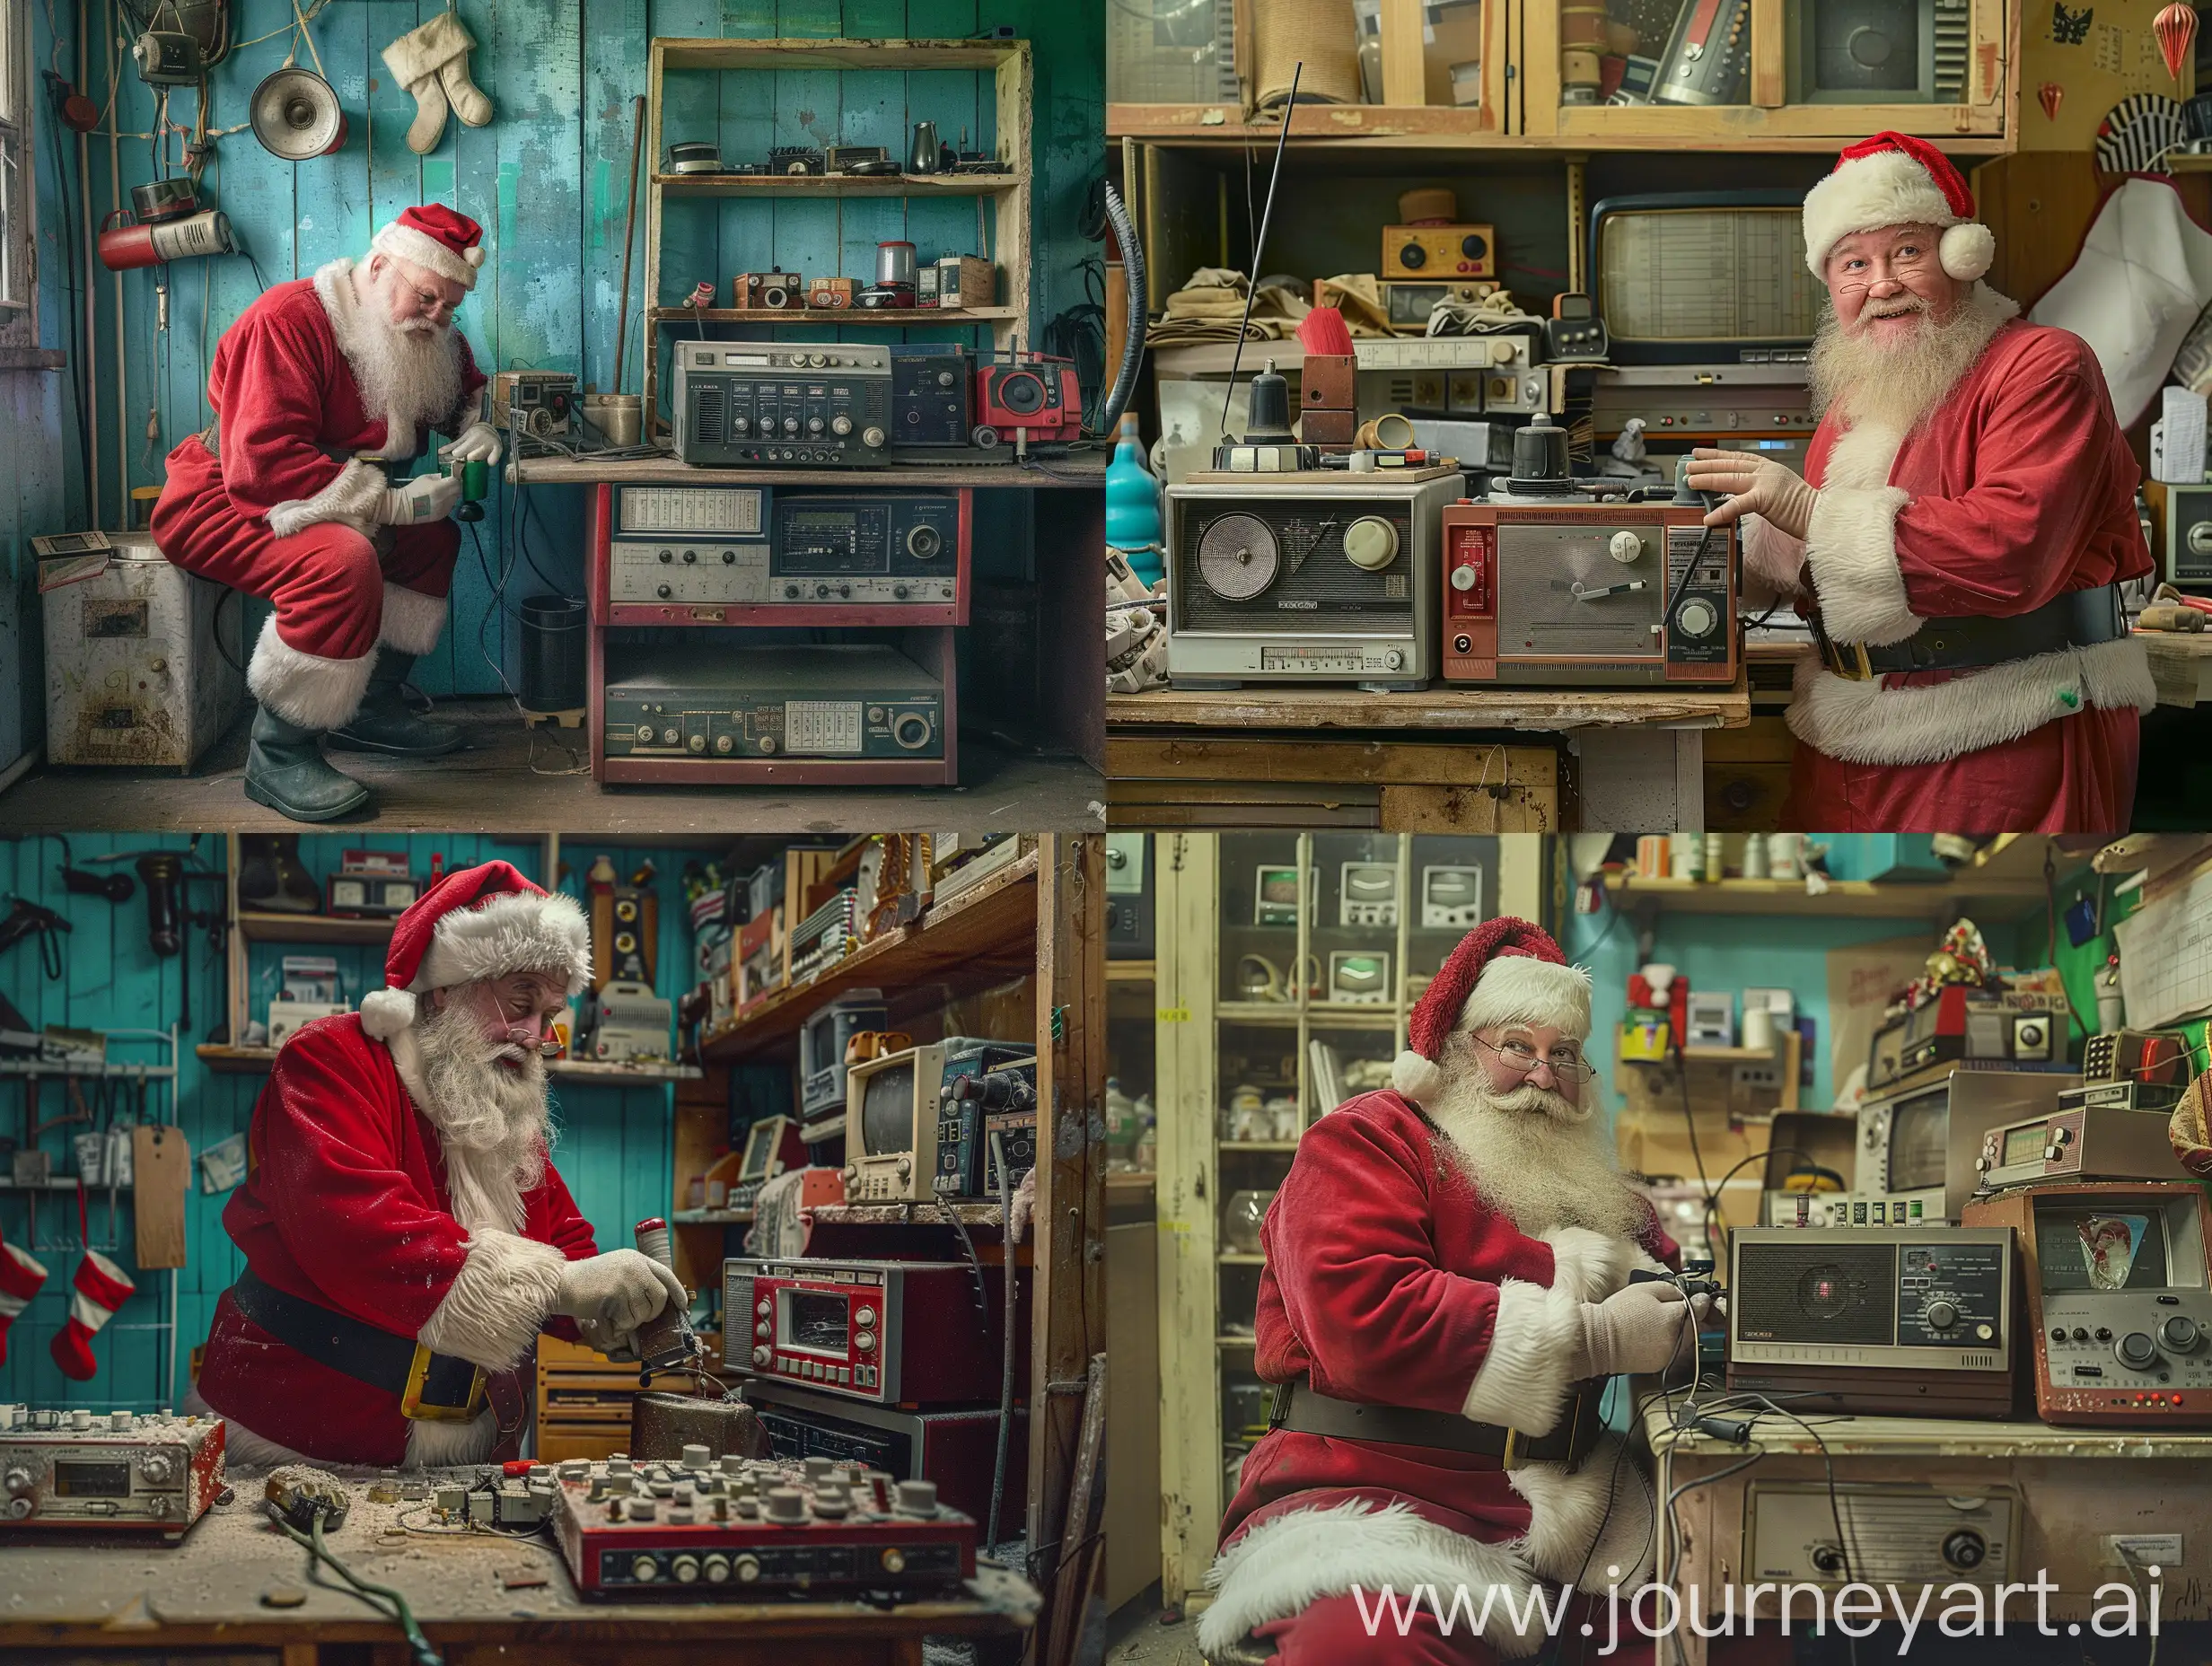 Santa Claus works as a repairman in a small radio shop in Russia, very good photo